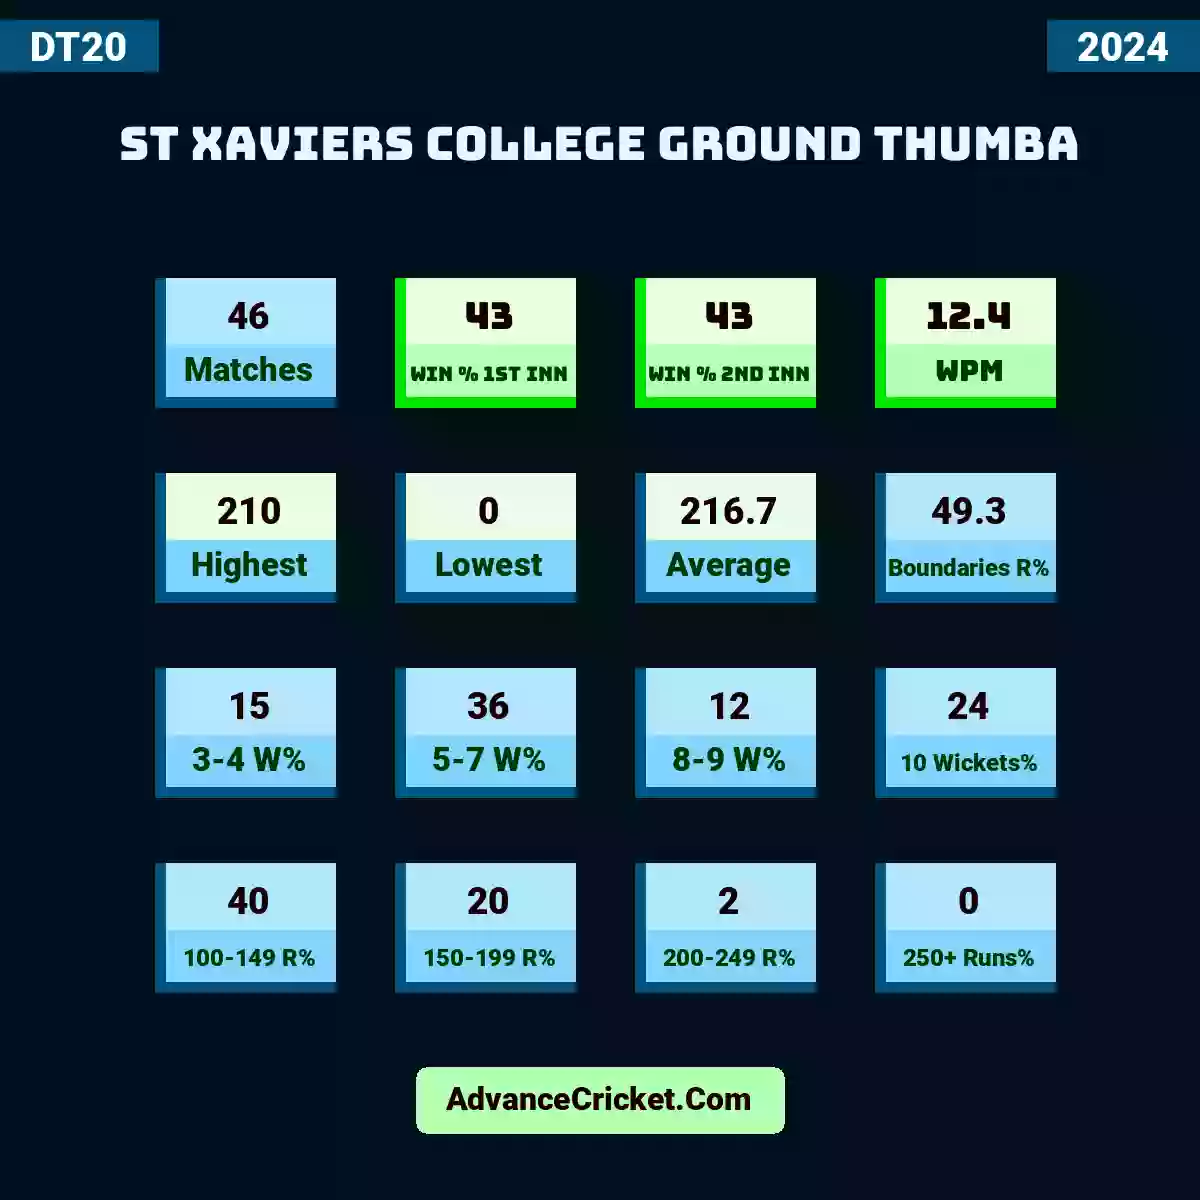 Image showing St Xaviers College Ground Thumba DT20 2024 with Matches: 41, Win % 1st Inn: 41, Win % 2nd Inn: 44, WPM: 12.5, Highest: 210, Lowest: 0, Average: 221.2, Boundaries R%: 50.3, 3-4 W%: 15, 5-7 W%: 35, 8-9 W%: 12, 10 Wickets%: 24, 100-149 R%: 41, 150-199 R%: 21, 200-249 R%: 2, 250+ Runs%: 0.